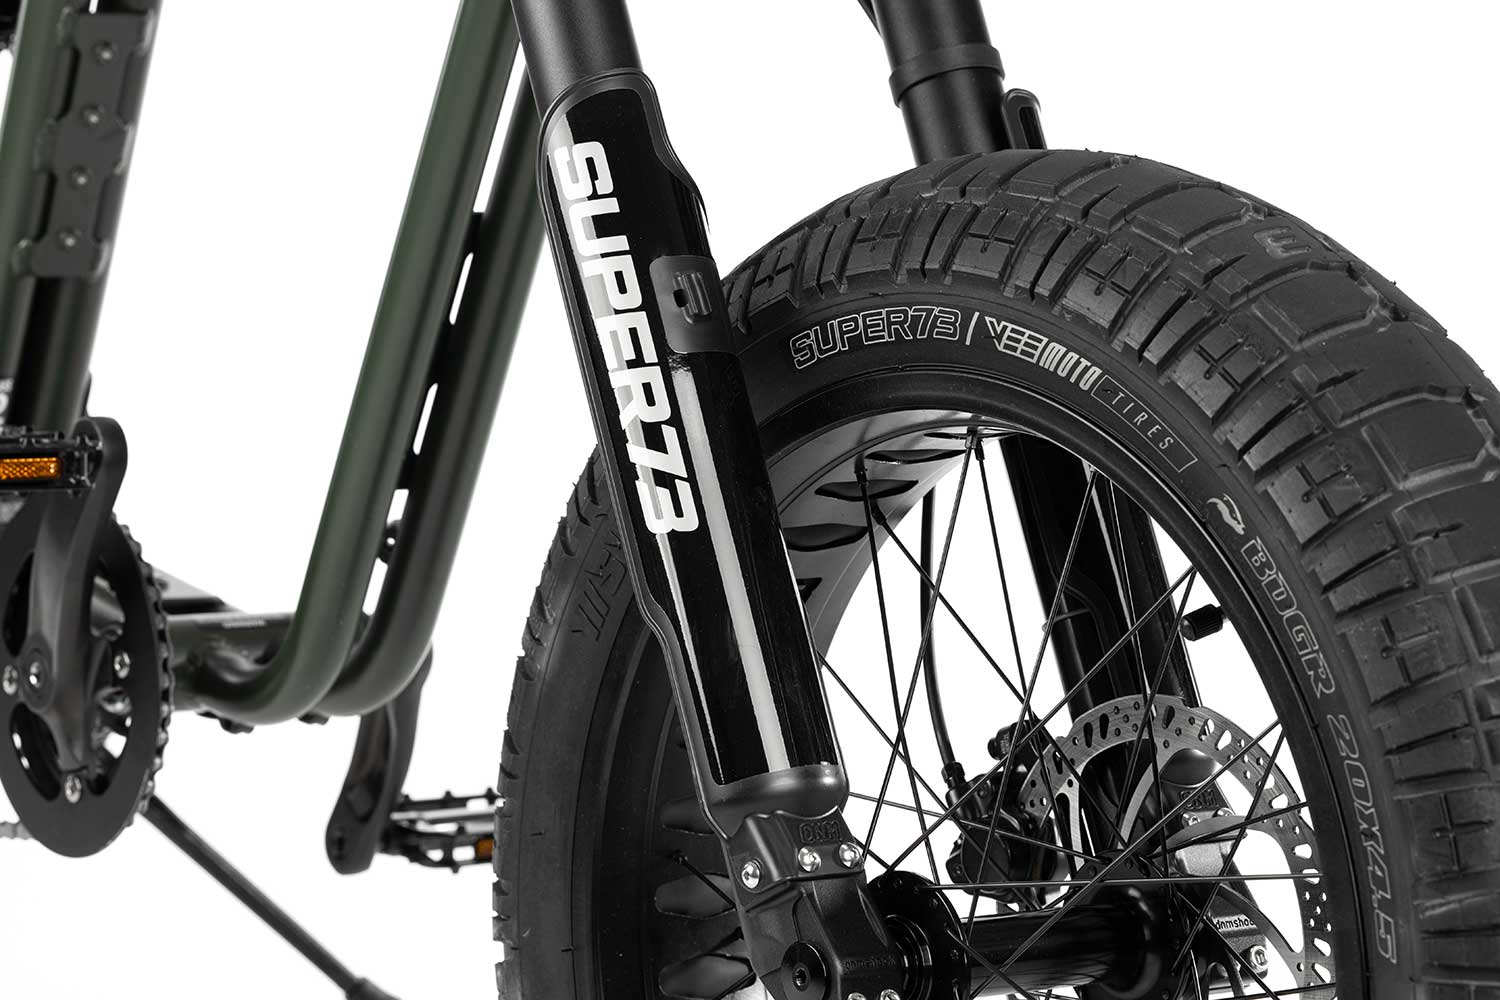 Closeup view of the Super73-R Olive Drab front wheel and suspension